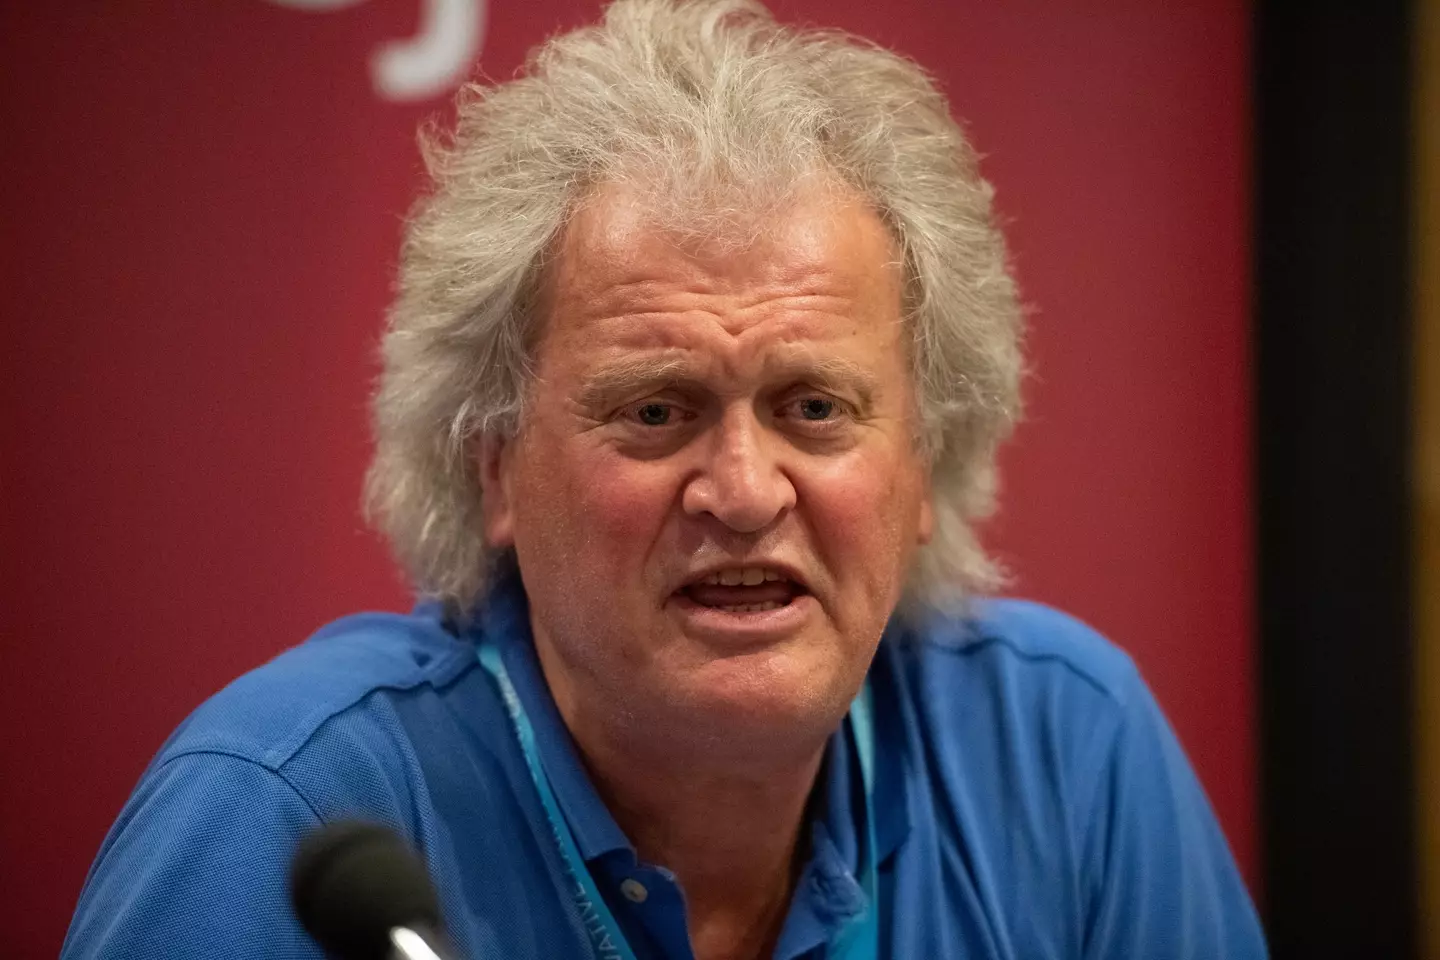 Spoons founder Tim Martin came under fire after withholding staff wages during the pandemic.